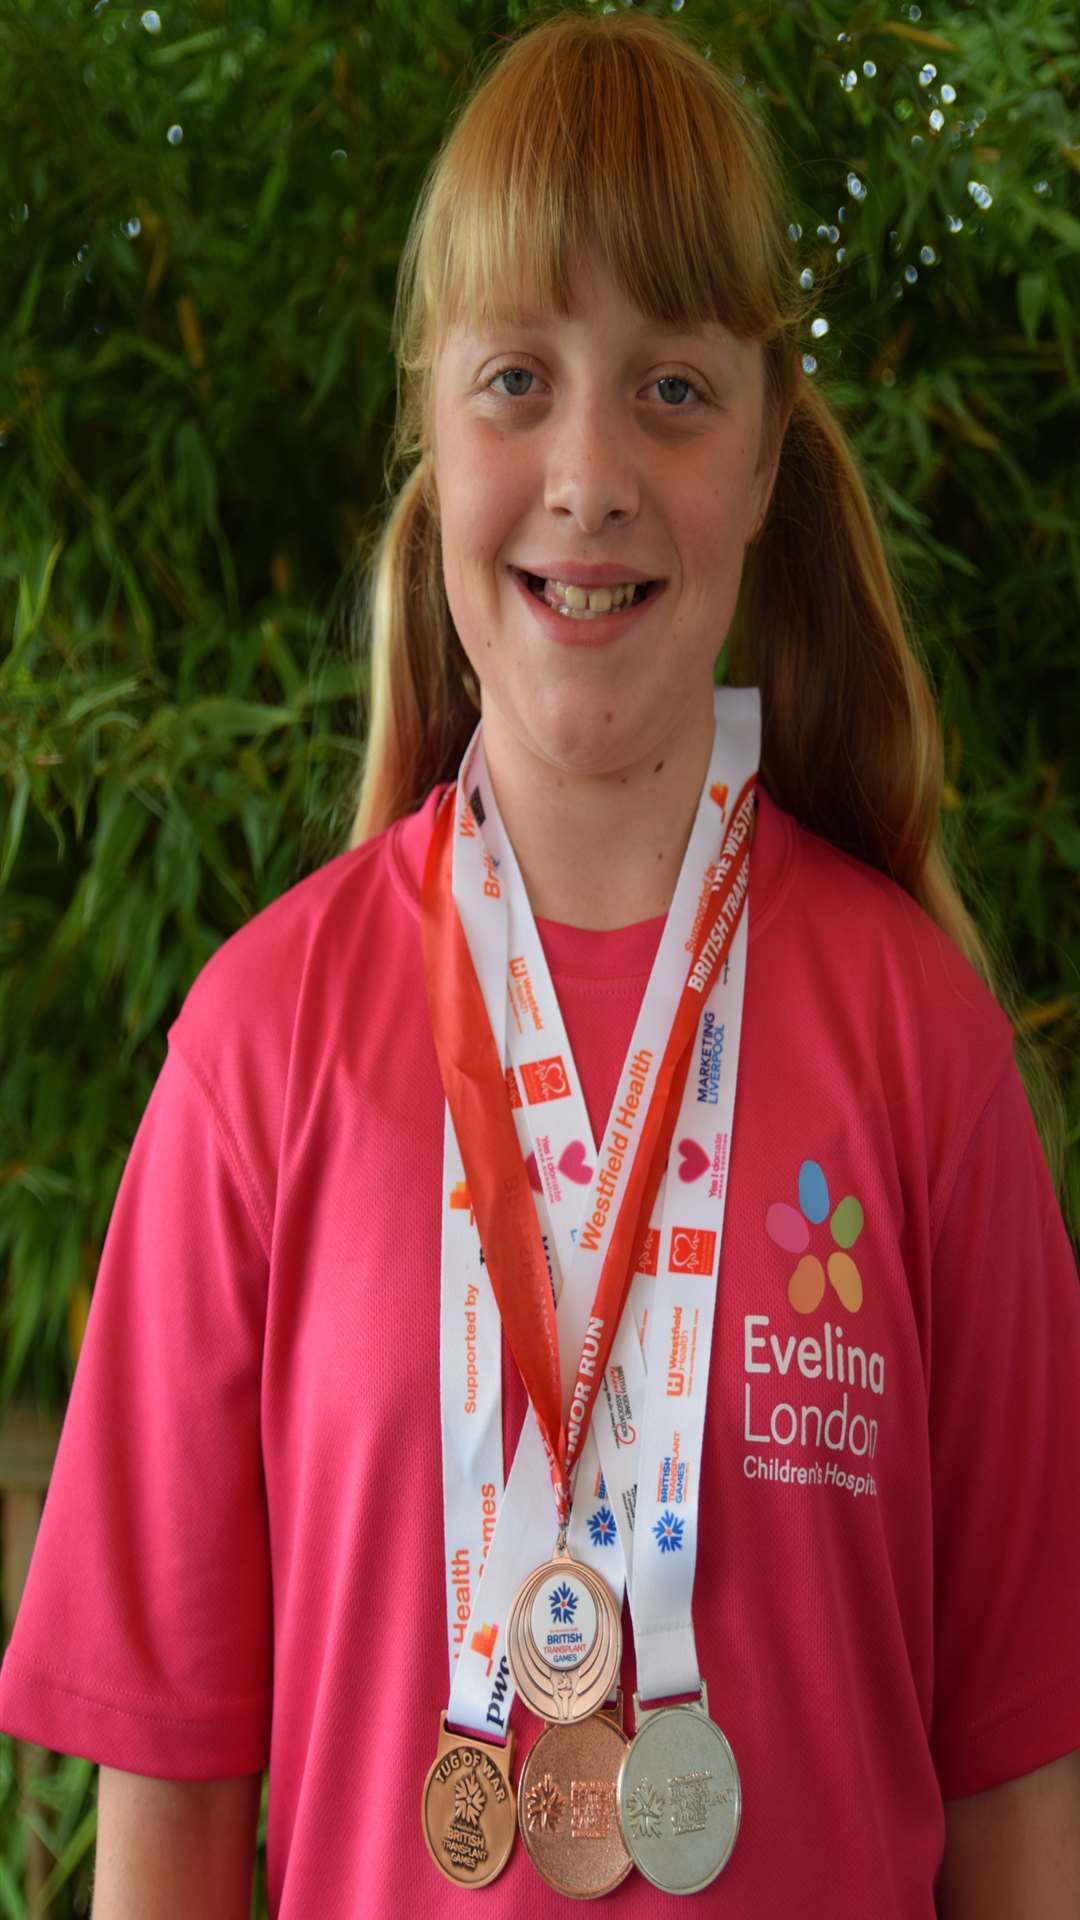 Nadine Guest has taken part in the British Transplant Games nearly every year since she was three